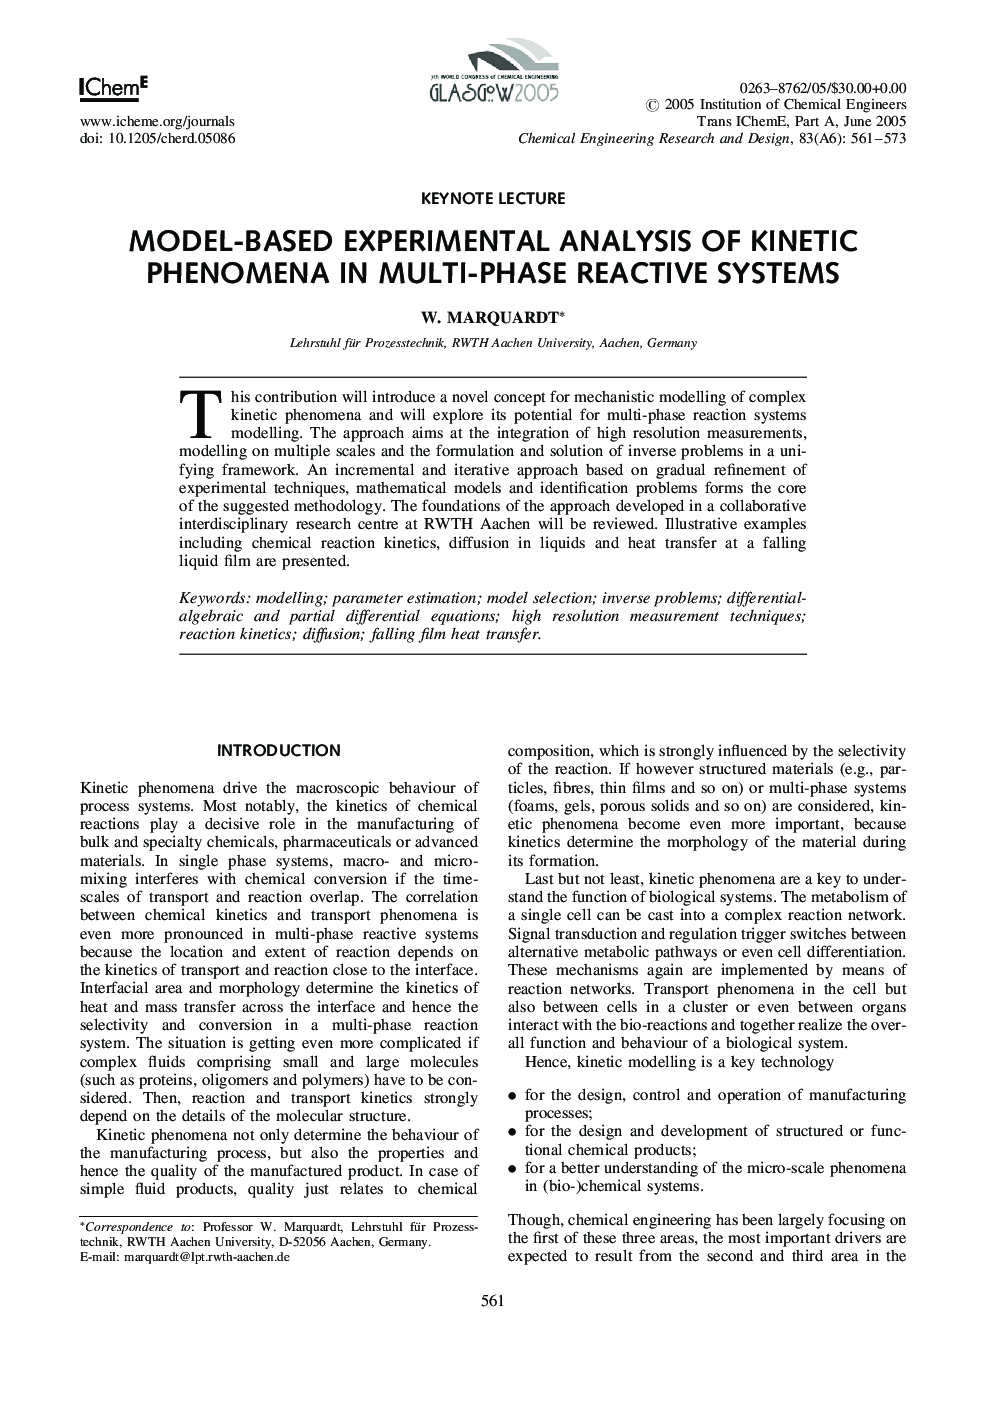 Model-Based Experimental Analysis of Kinetic Phenomena in Multi-Phase Reactive Systems